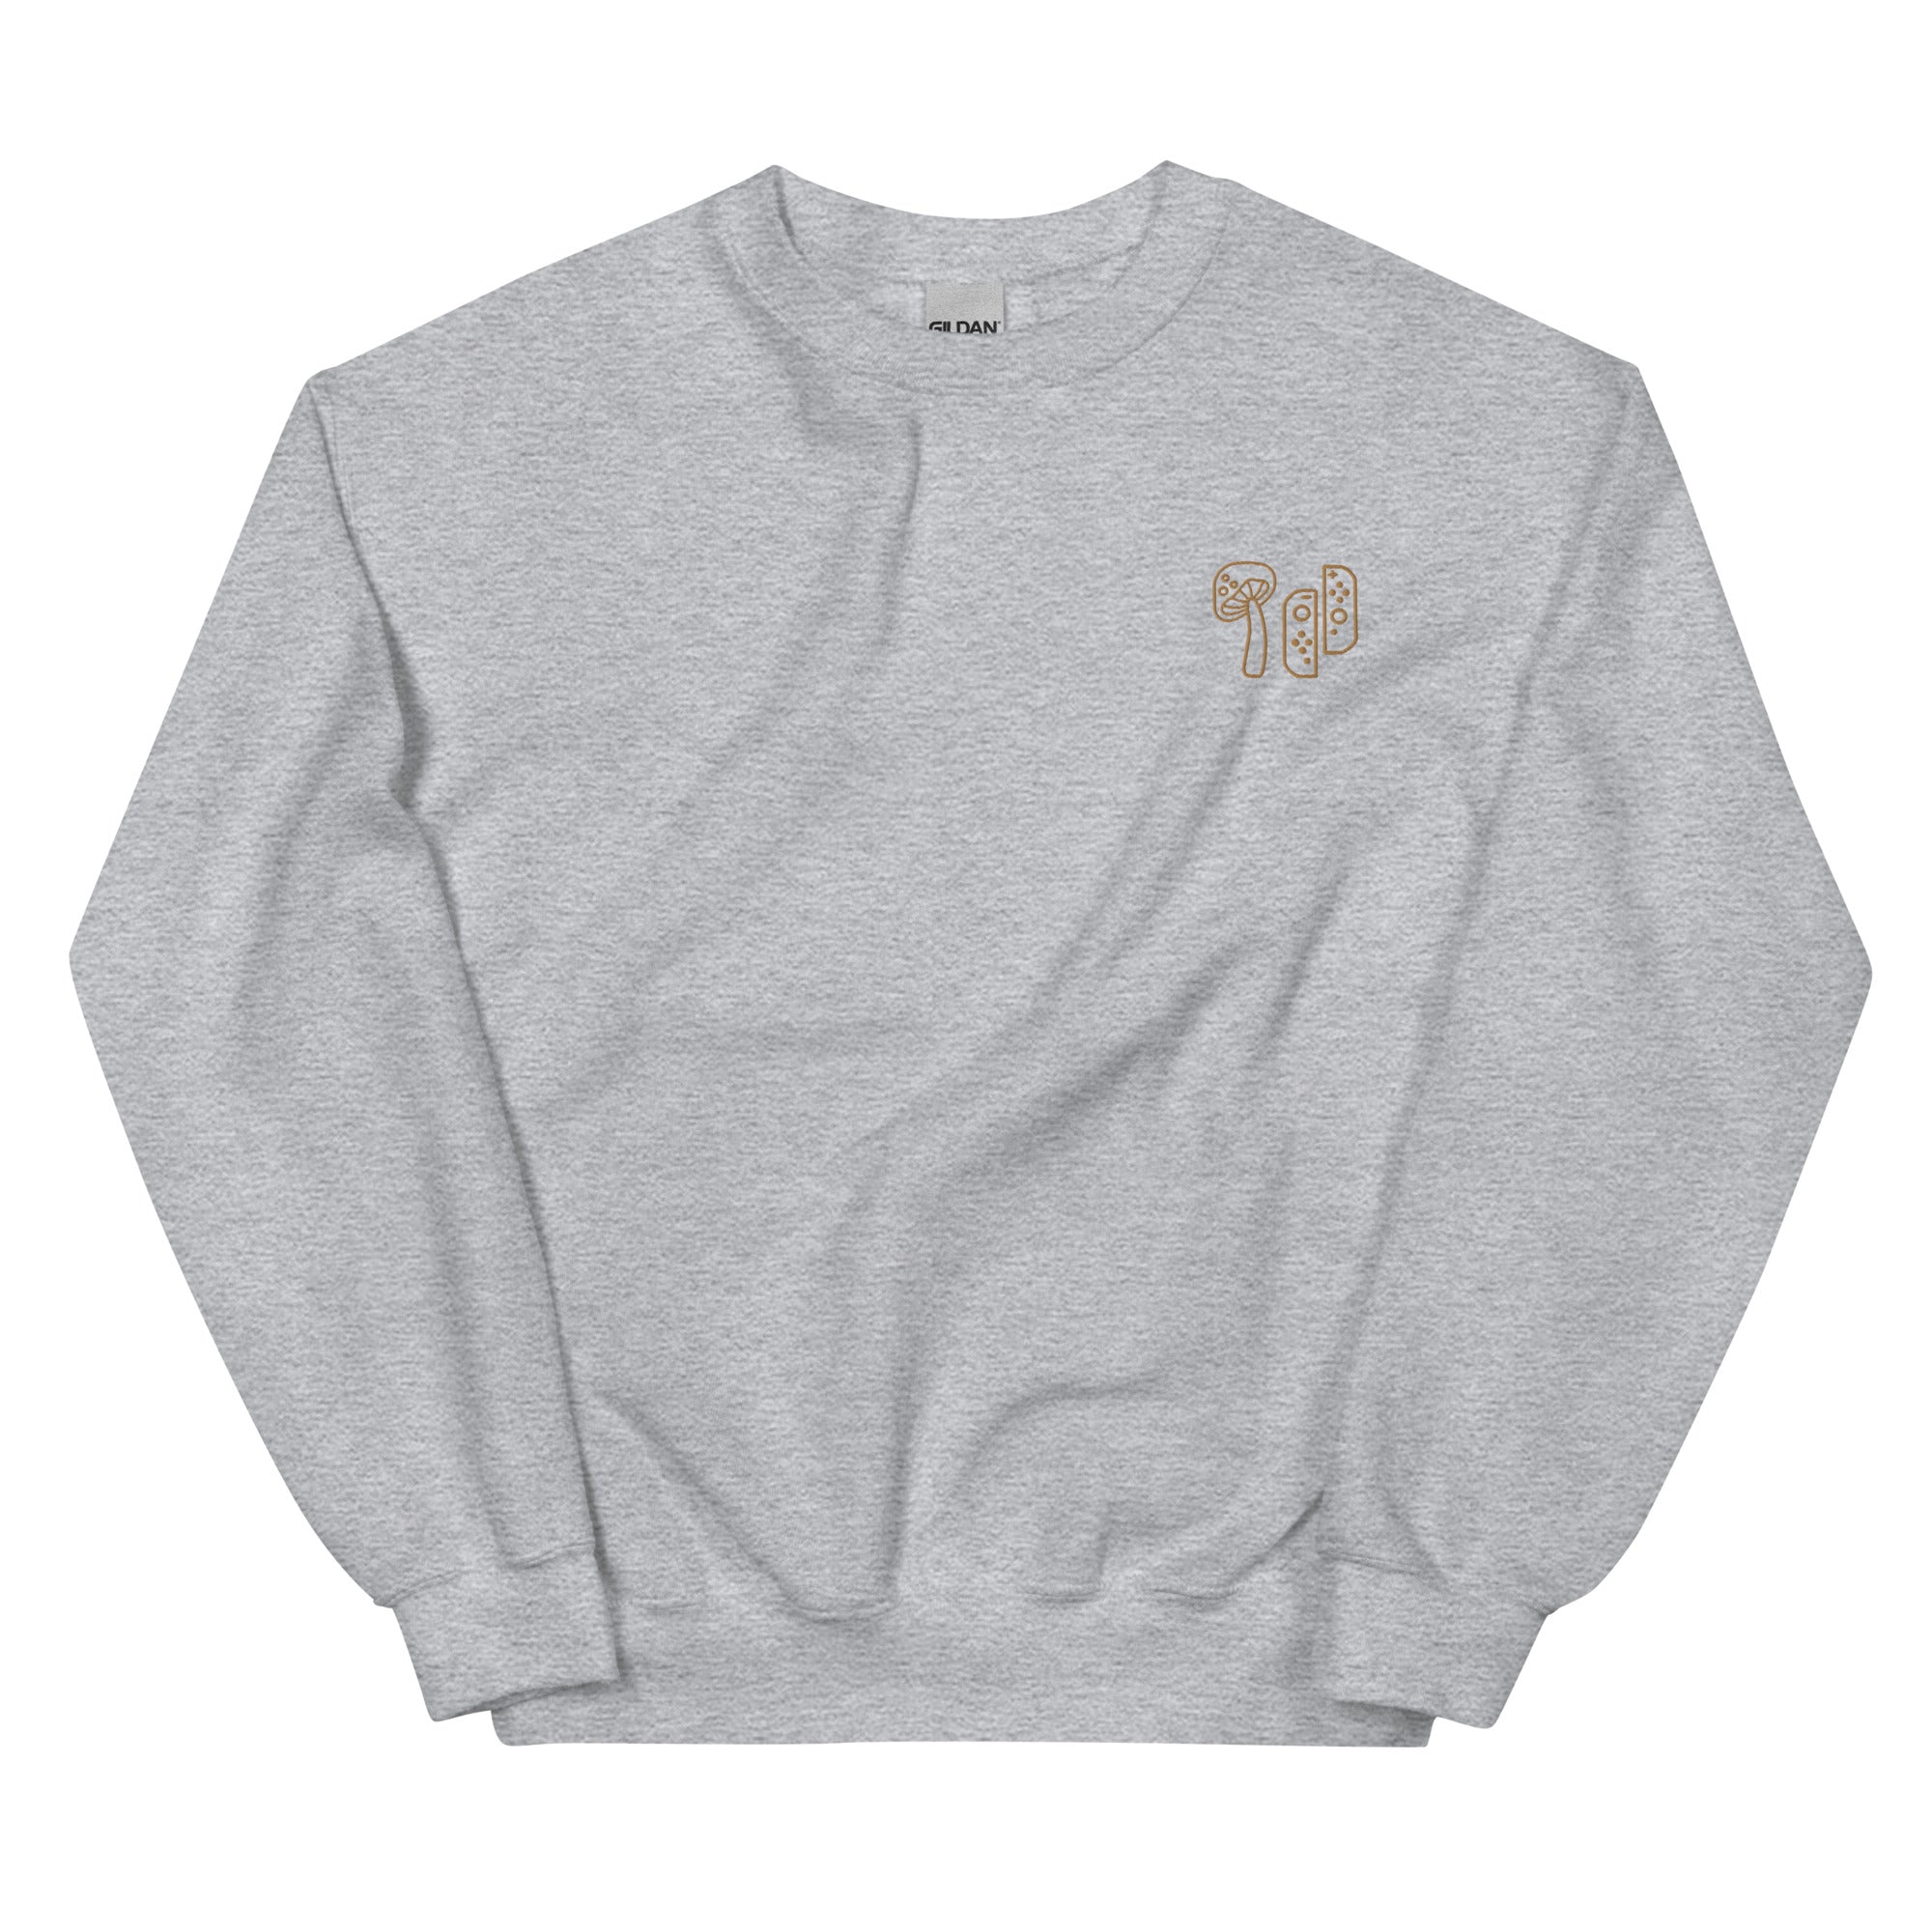 Mushroom & Switch | Embroidered Unisex Sweatshirt | Cozy Gamer Threads and Thistles Inventory Sport Grey S 